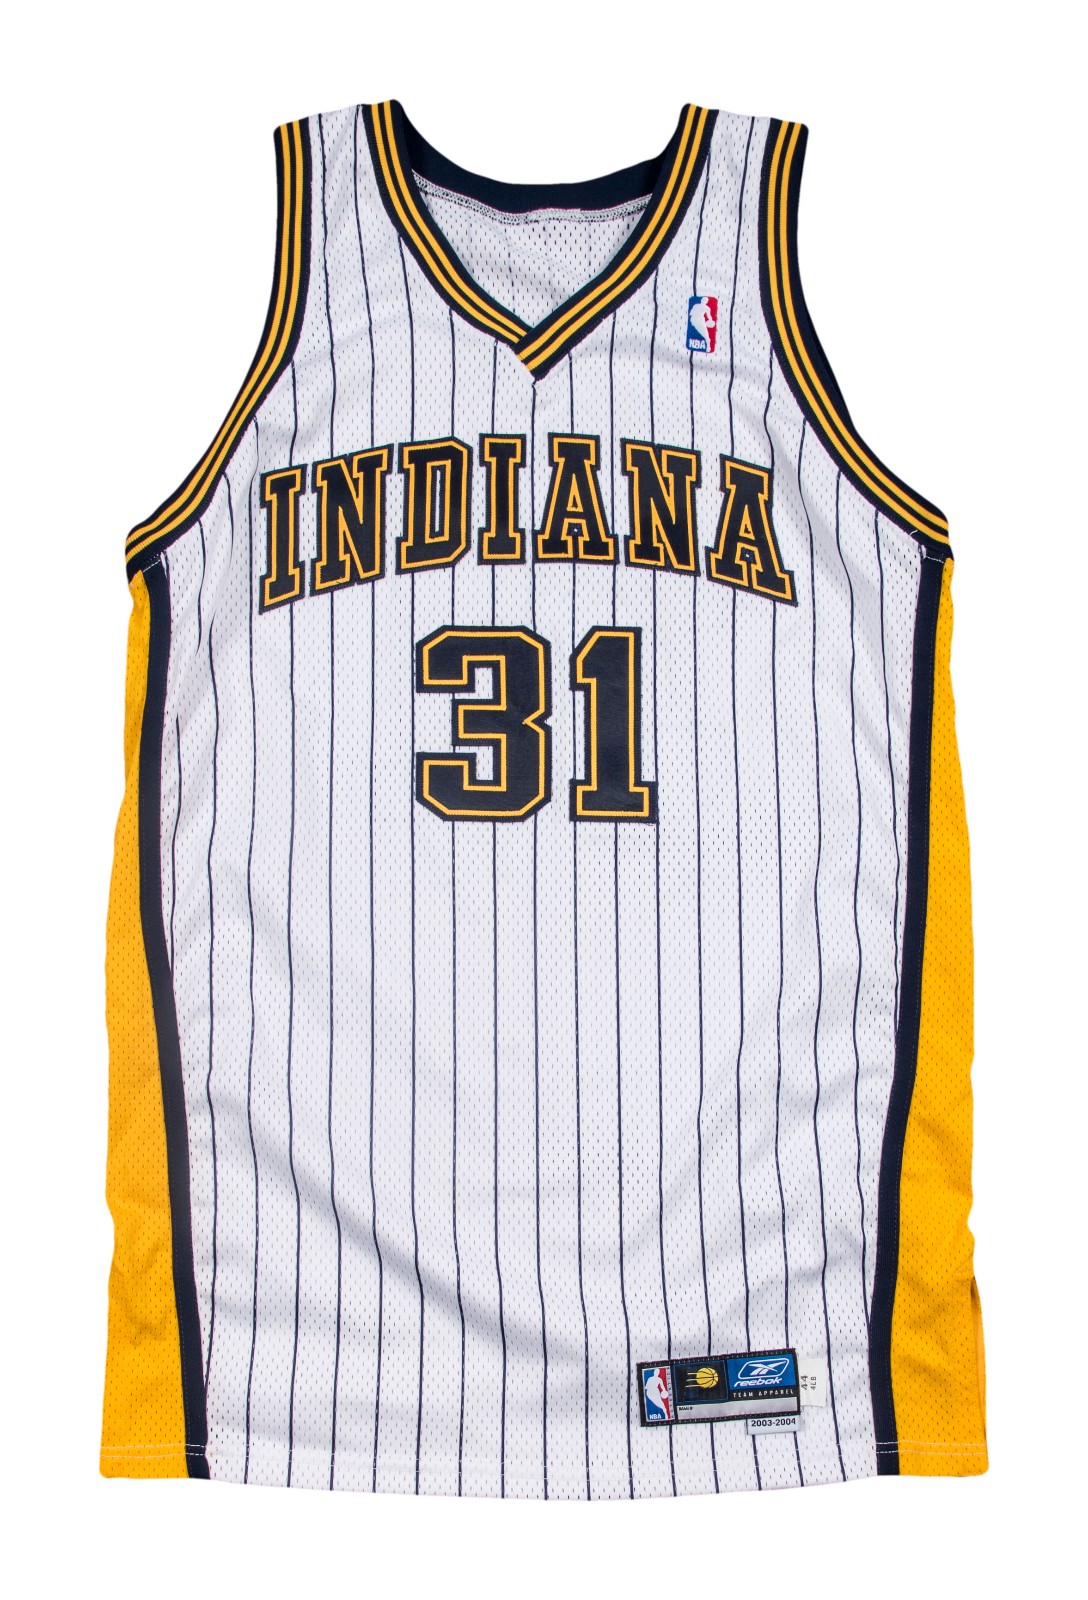 Indiana Pacers 200405 Jerseys